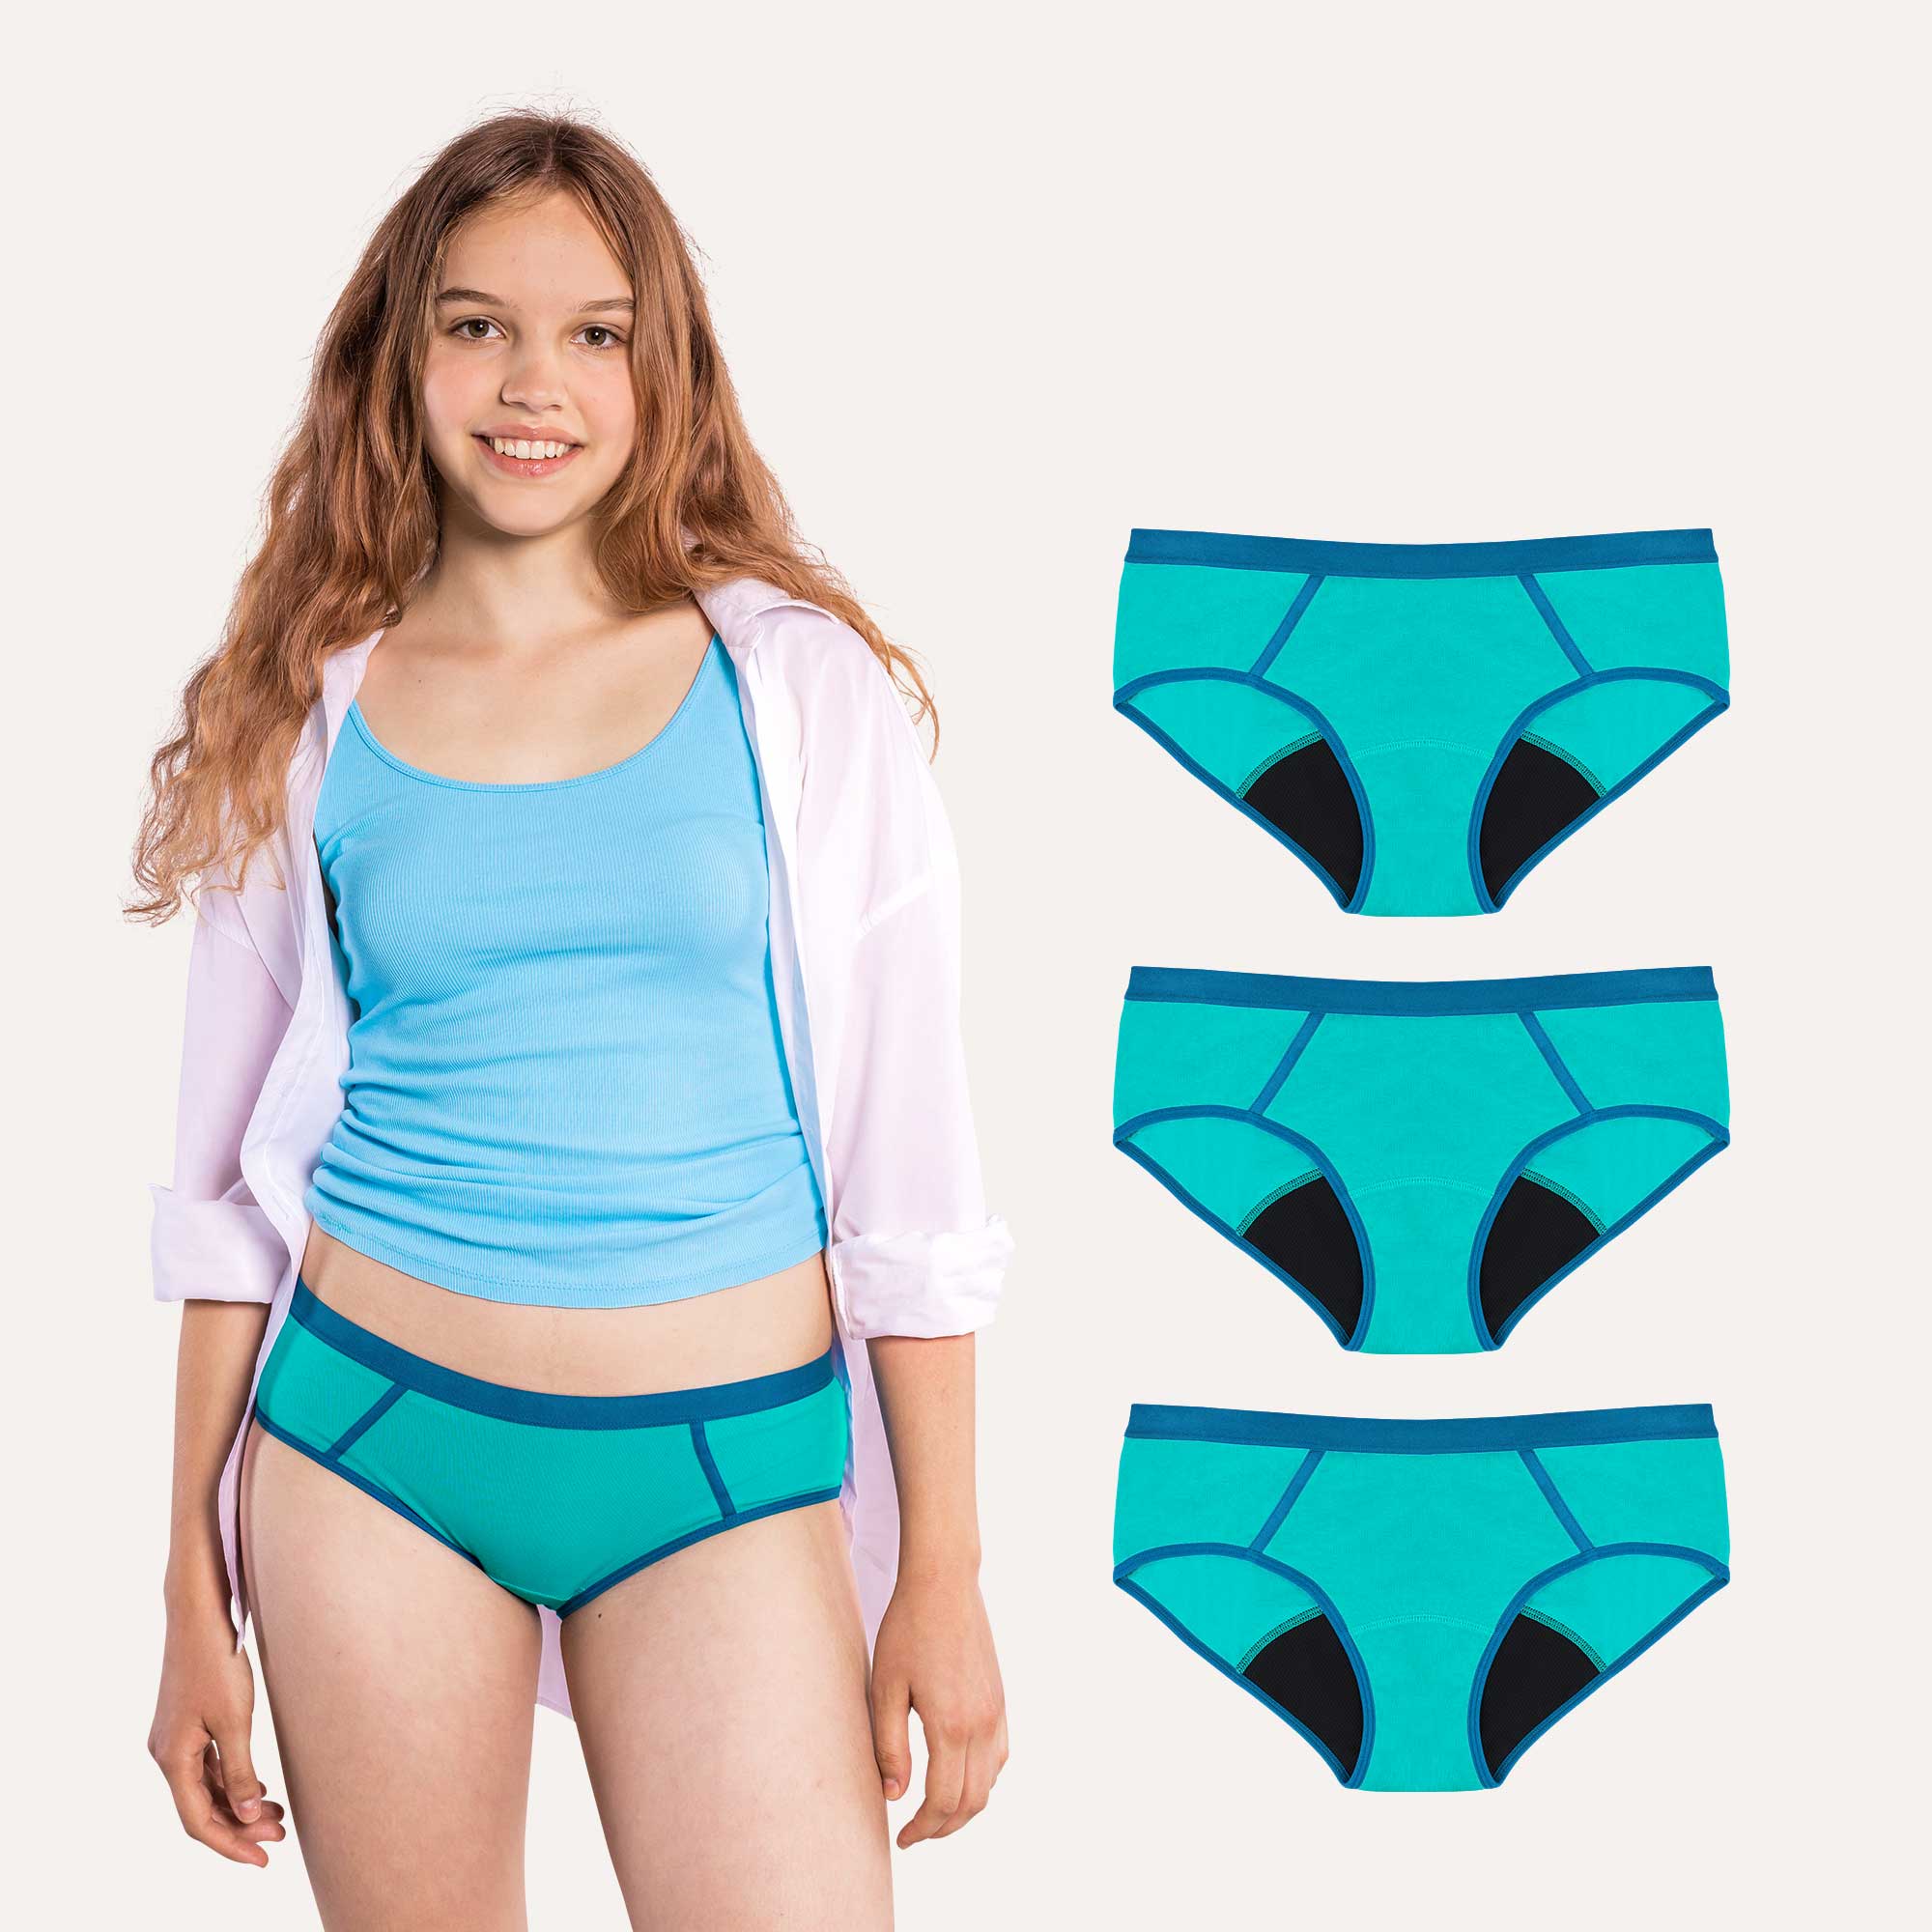  Period Panties, Period Underwear For Teens, Holds